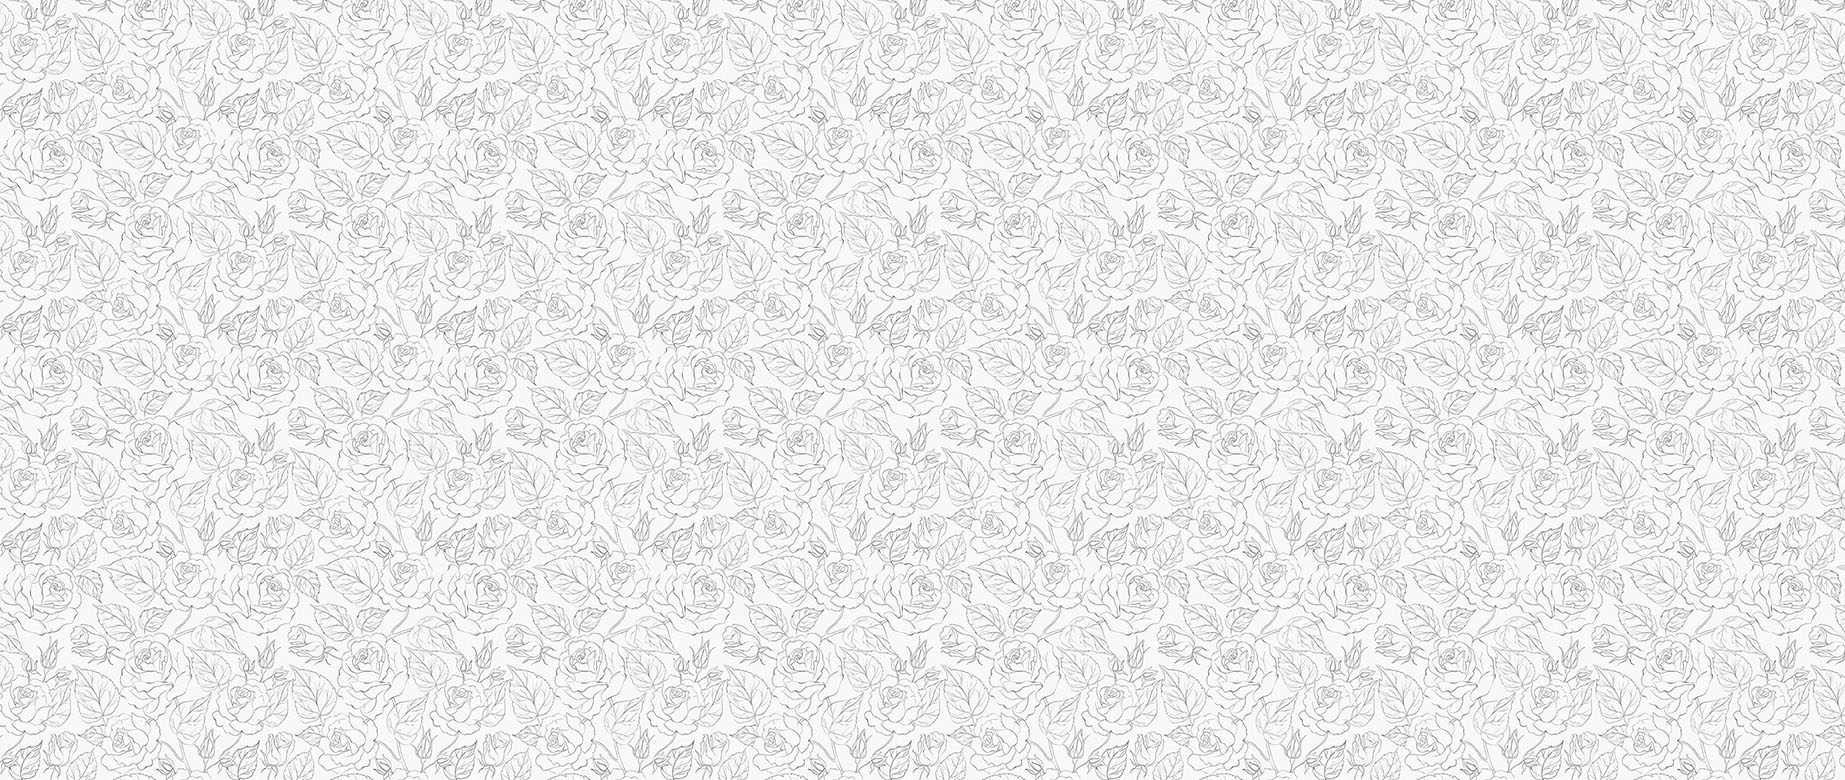 rose-and-leaves-sketch-outline-wallpaper-wide-view